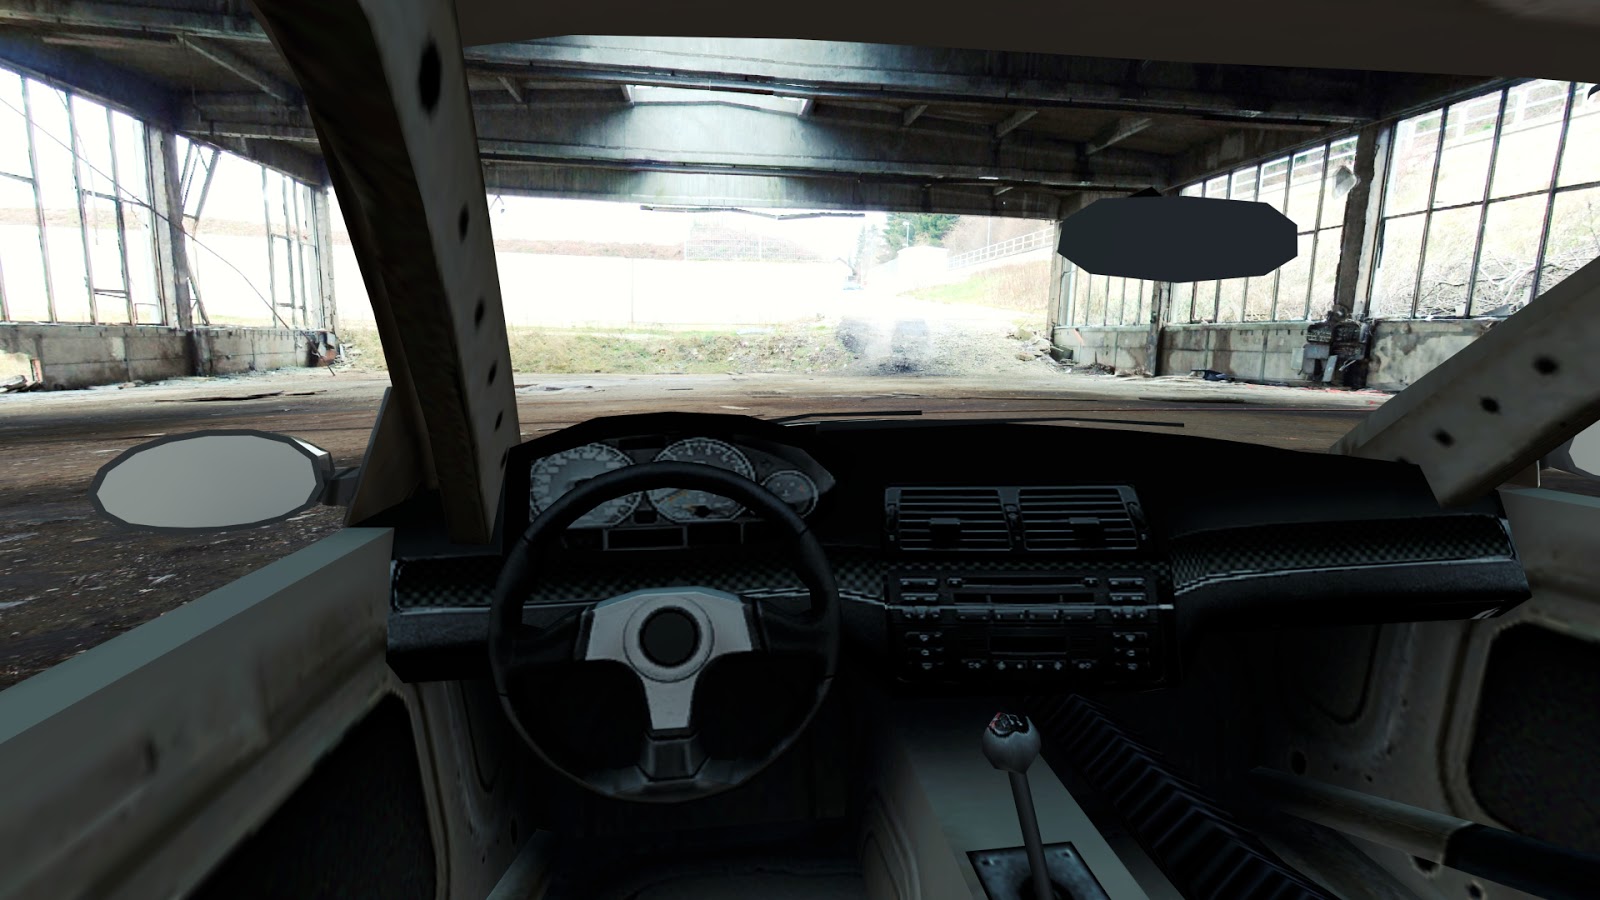 This is the MOST WANTED mod in the Assetto Corsa world! : r